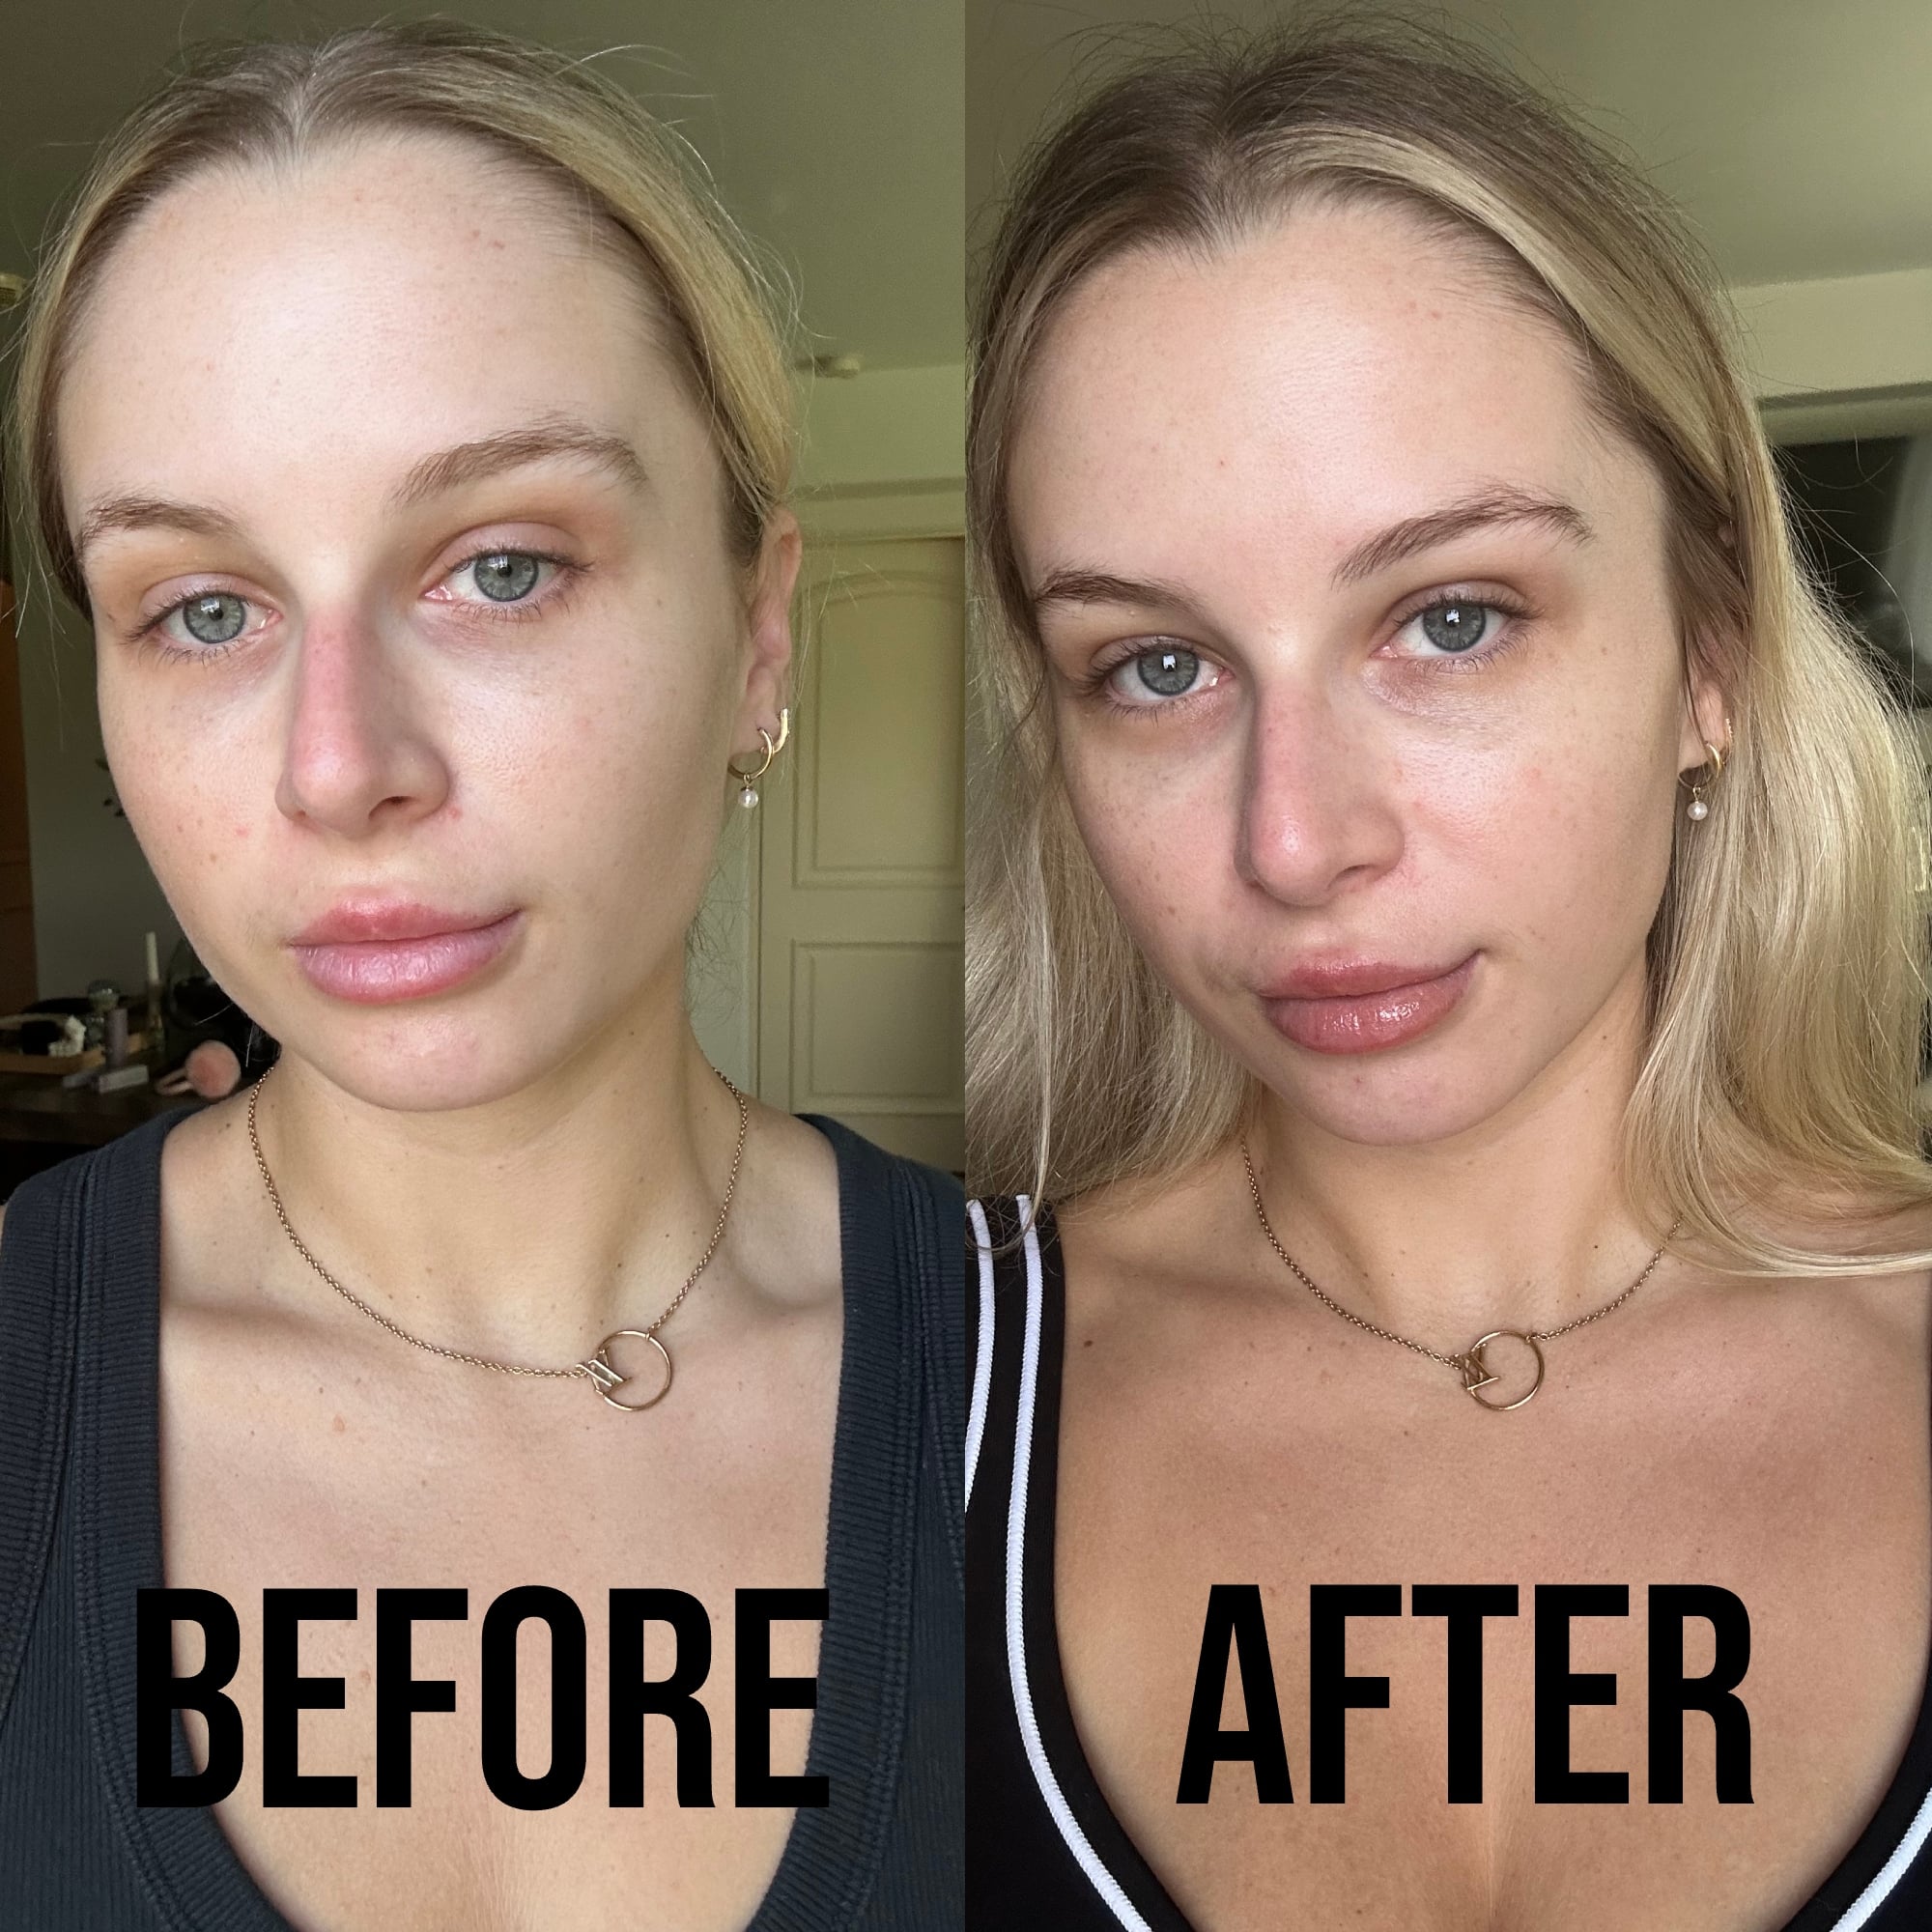 Taylor Before and After Using Dr. Brandt's Revitalizing Face Serum